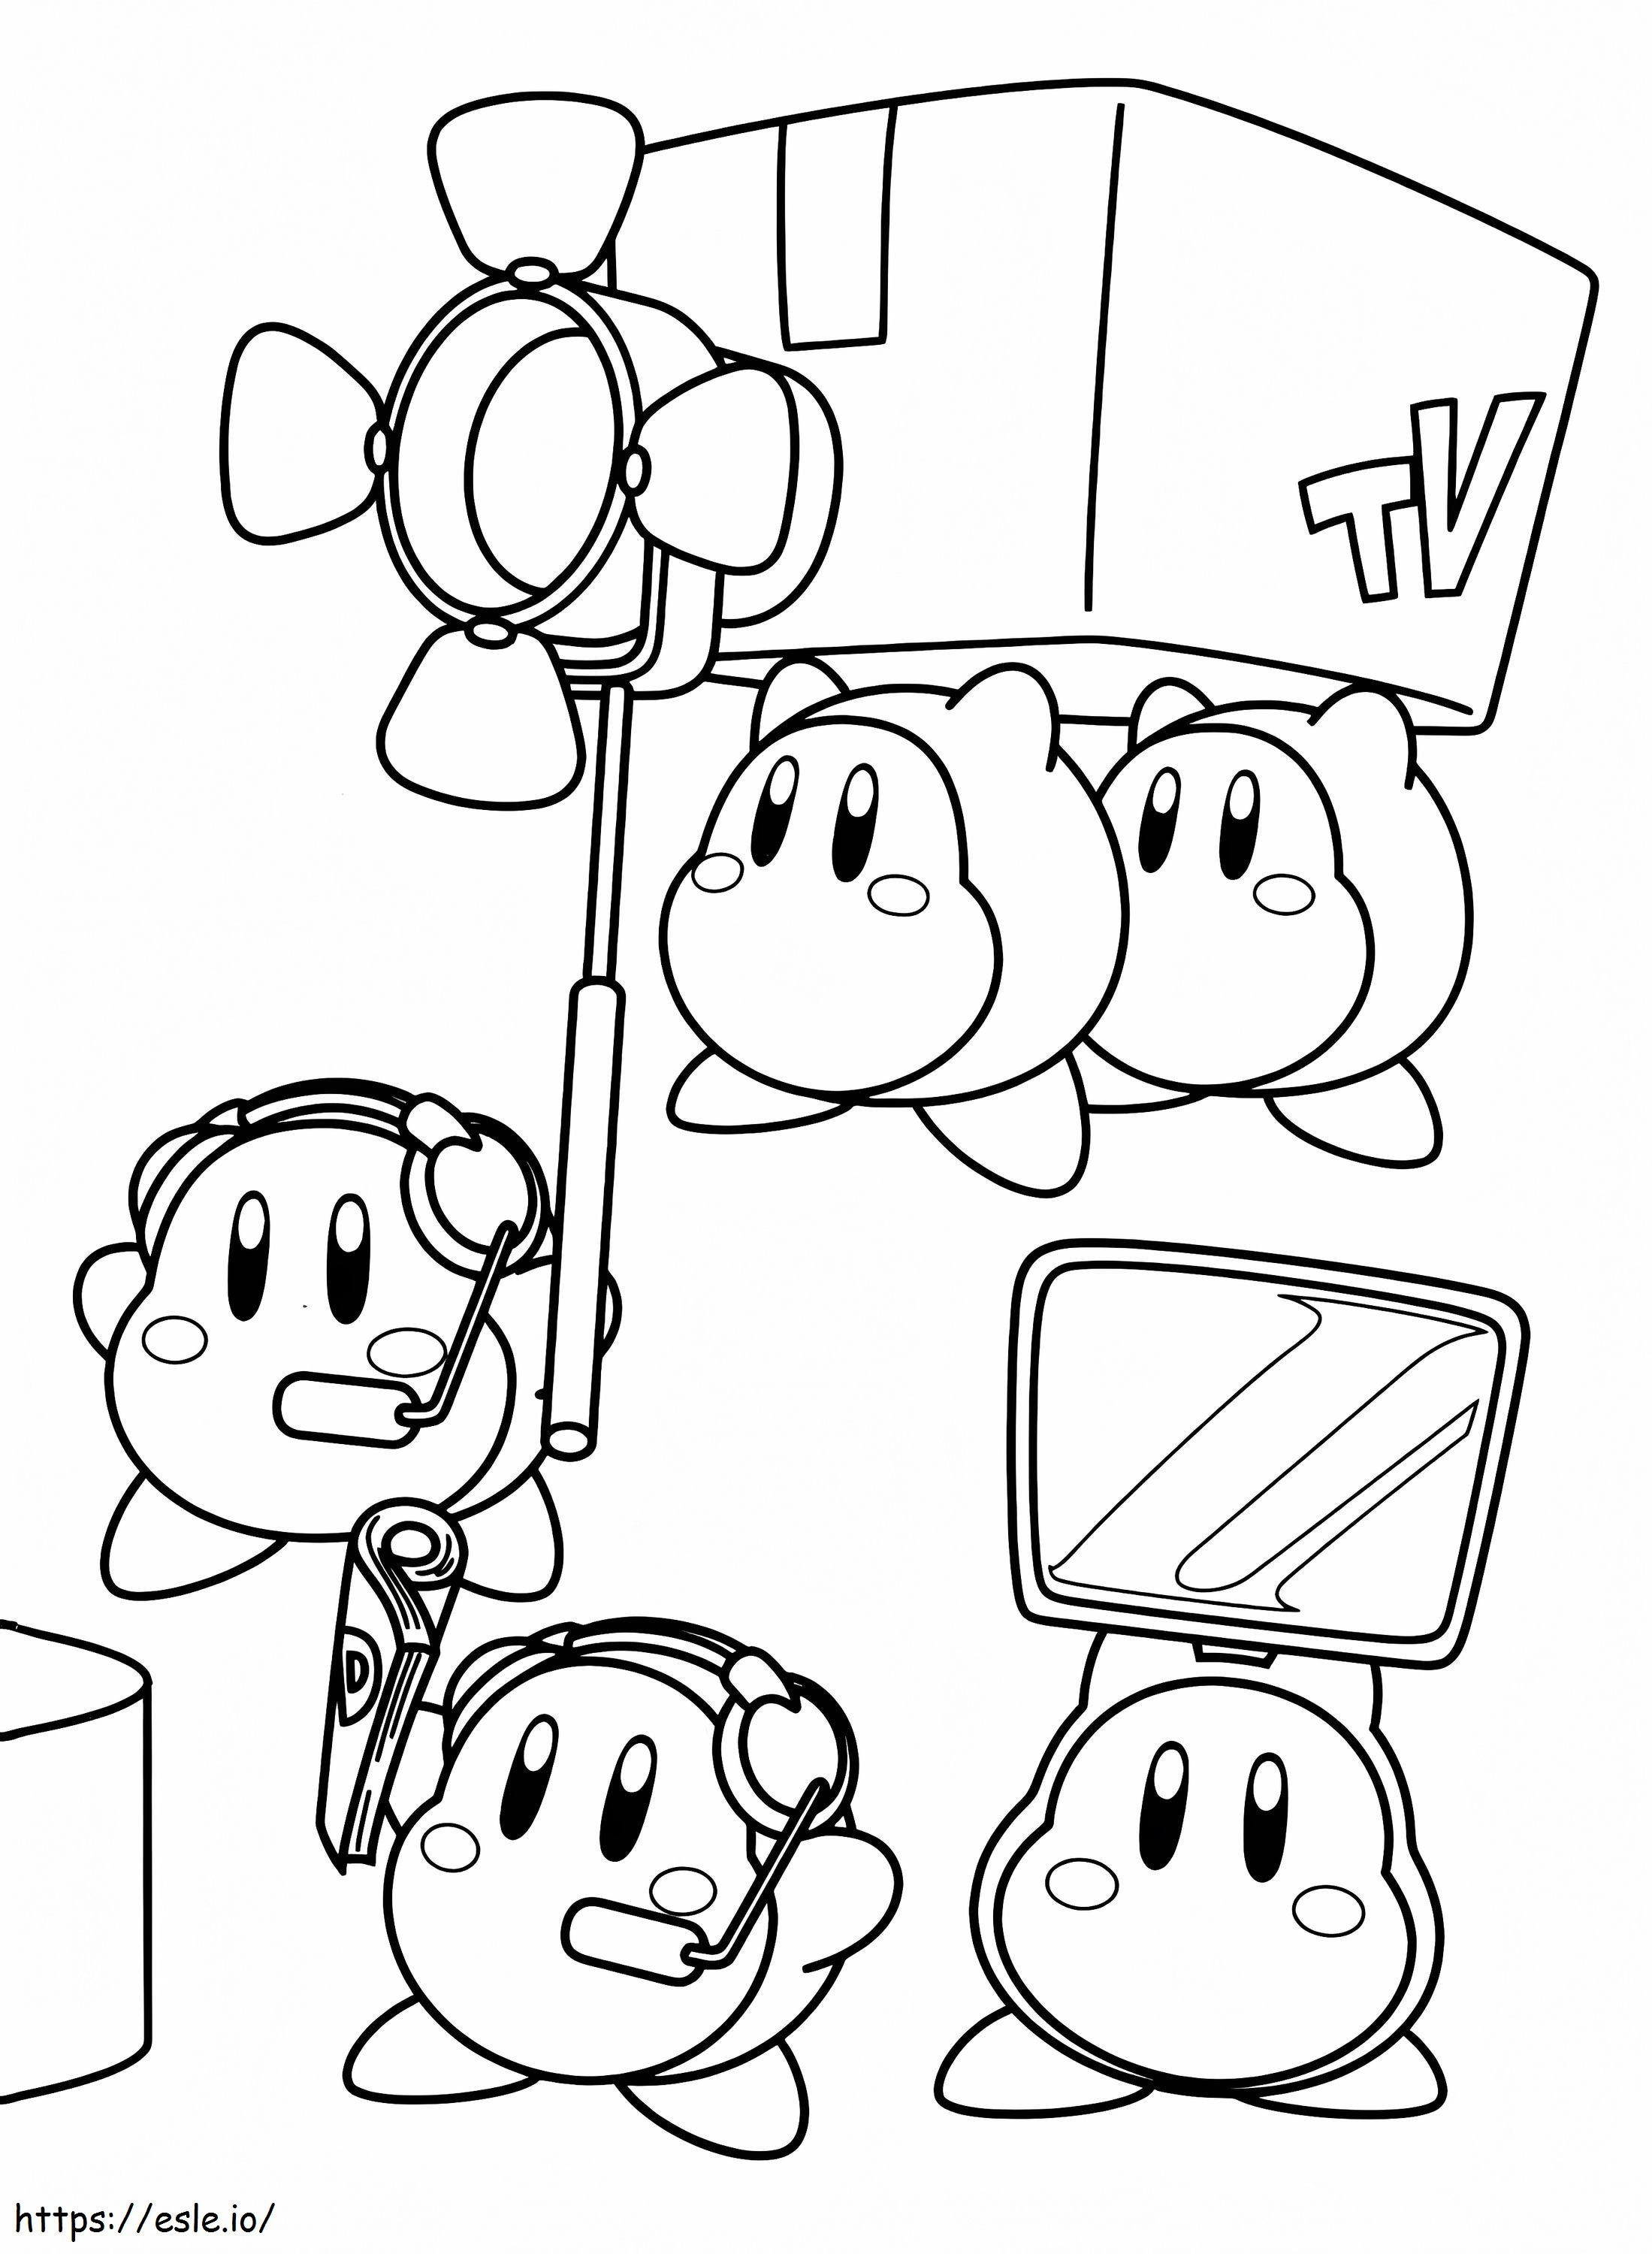 Printable Cute Kirby coloring page